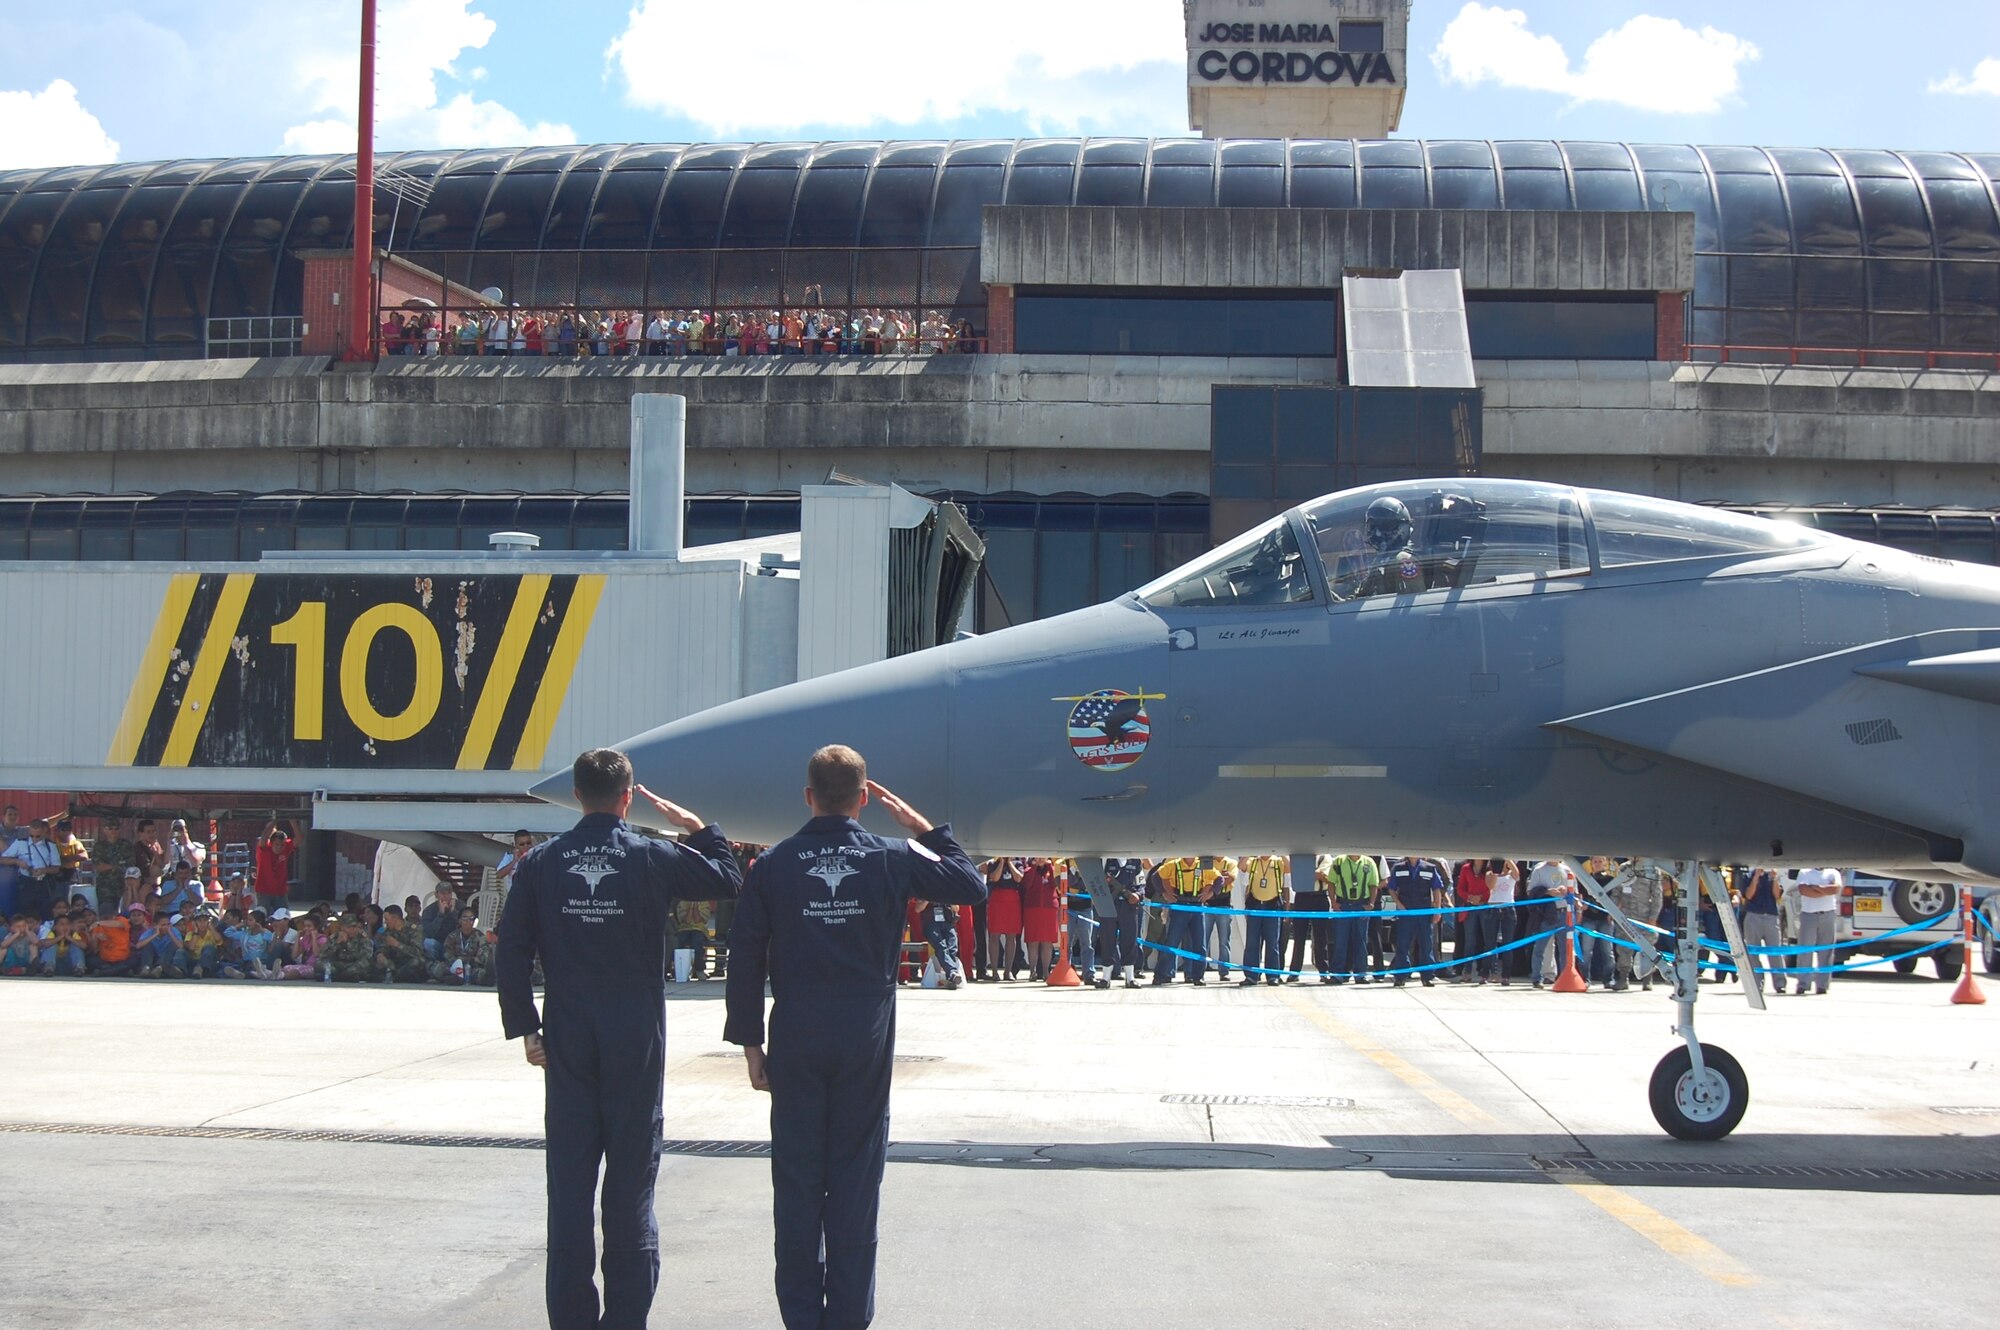 Members of the F-15 West Coast Demonstration Team salute the departing F-15C Eagle, flown by Capt. Sam Joplin, during the pre-flight portion of the team’s demonstration at the RIO NEGRO air and trade show venue in Medellín, Colombia. The Demonstration Team celebrated 25 years of service during RIO NEGRO by performing for audiences at the Medellín International Airport for six days, thrilling an audience estimated at more than 100,000 Colombian citizens. (Photo by Capt. Nathan Broshear) 